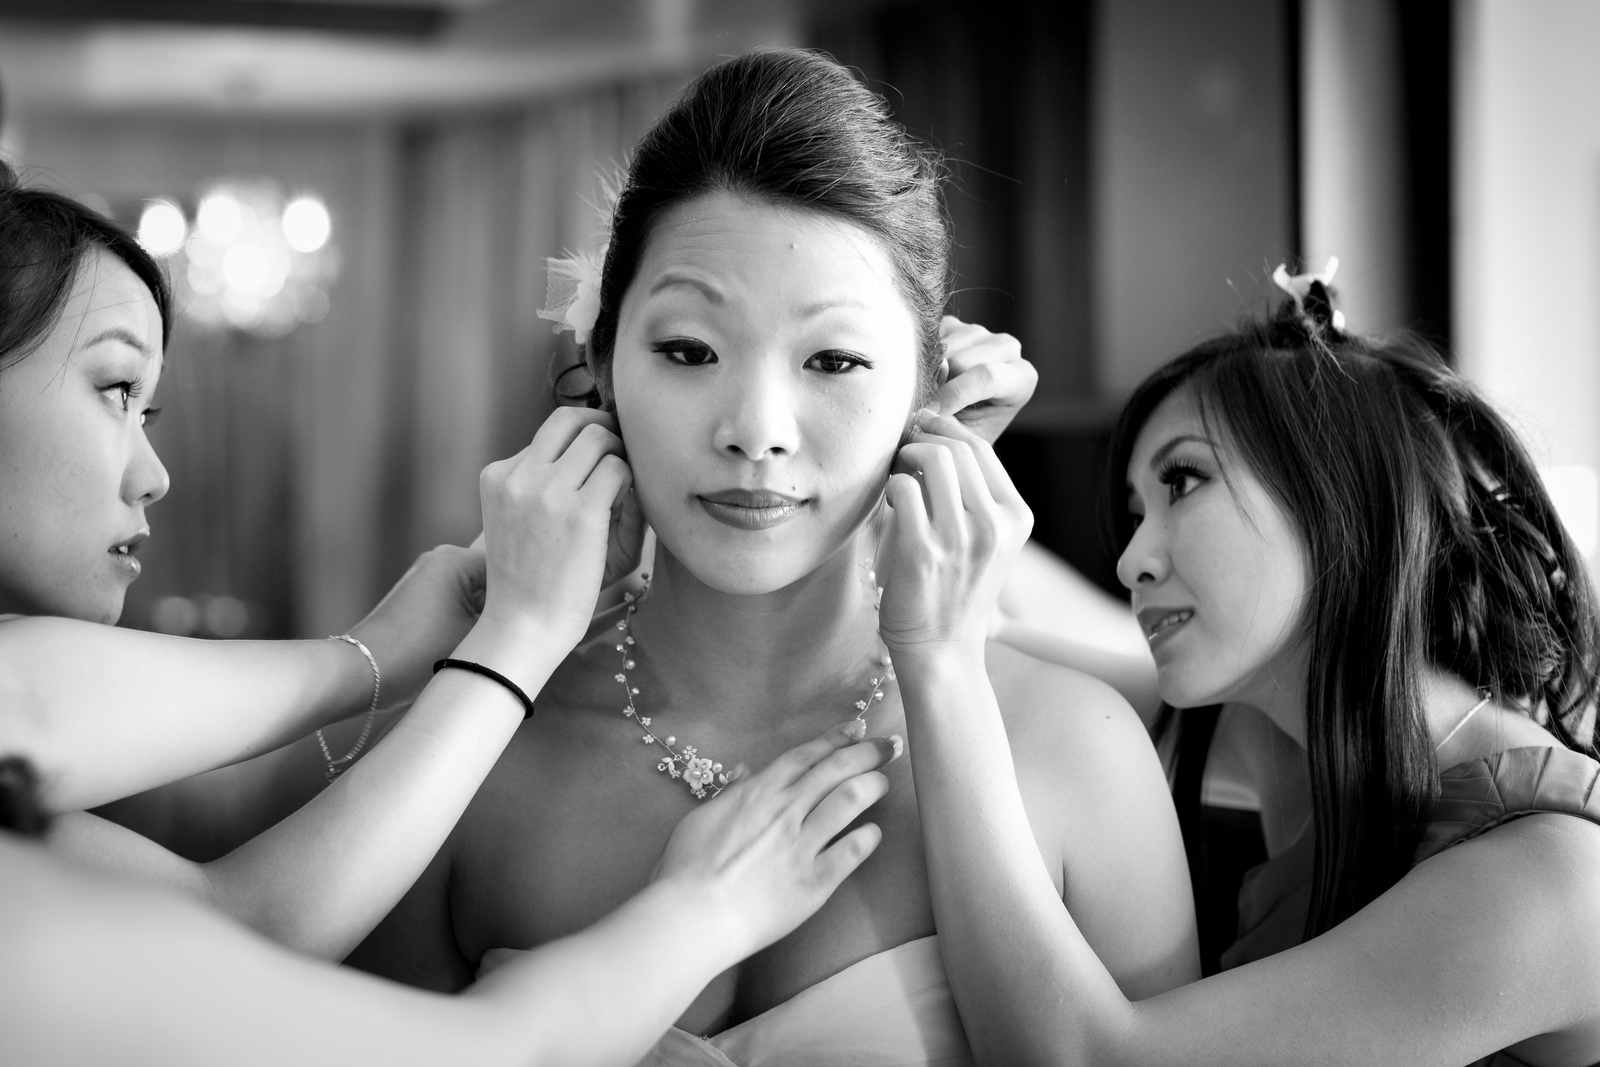 The bride has some last minute touch-up done, with the help of her bridesmaids, at the Washington Athletic Club (WAC) prior to the start of the wedding at the Seattle Aquarium. (Wedding Photography by Scott Eklund/Red Box Pictures)